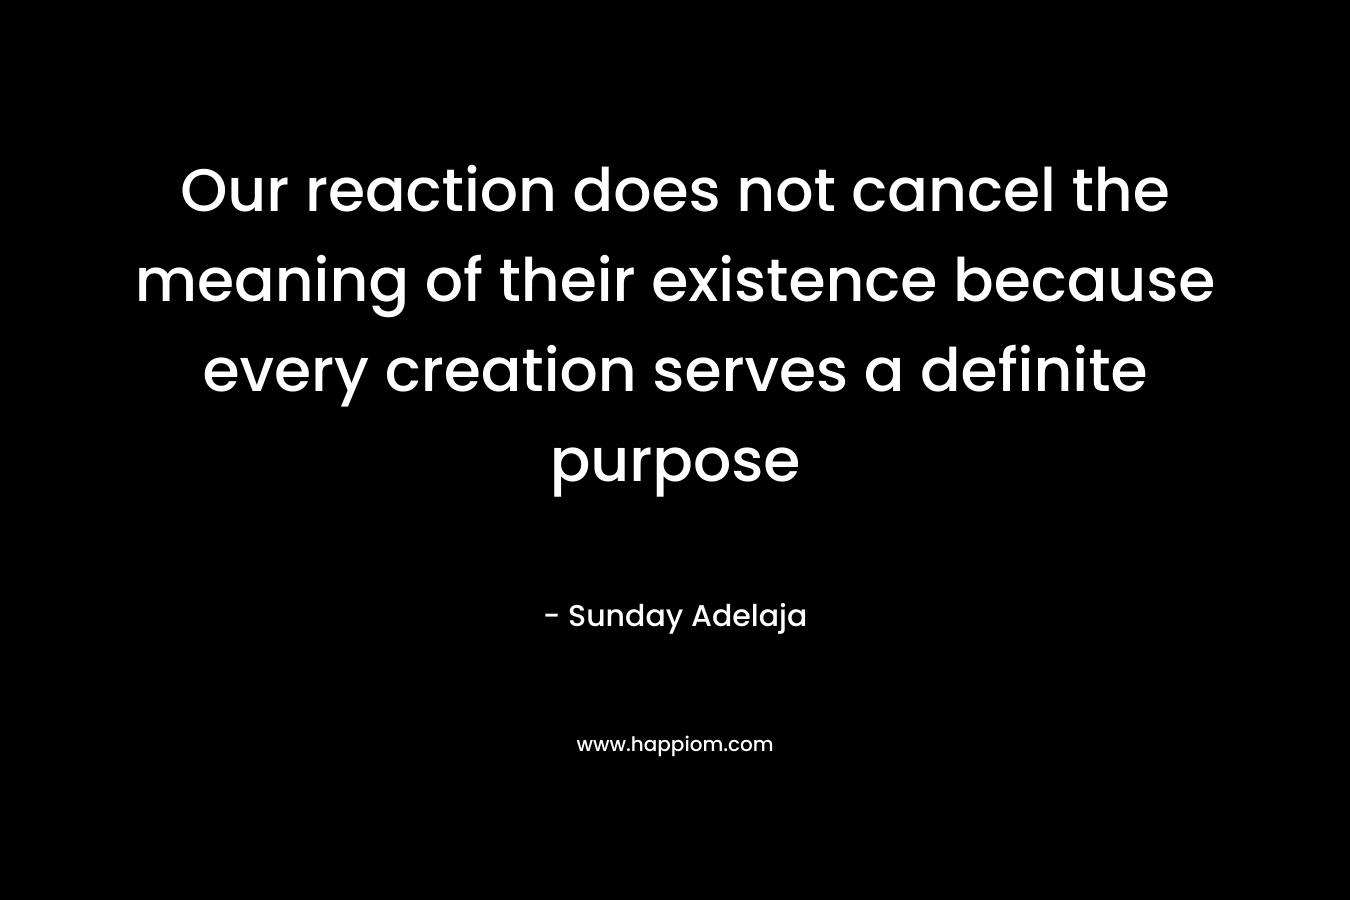 Our reaction does not cancel the meaning of their existence because every creation serves a definite purpose